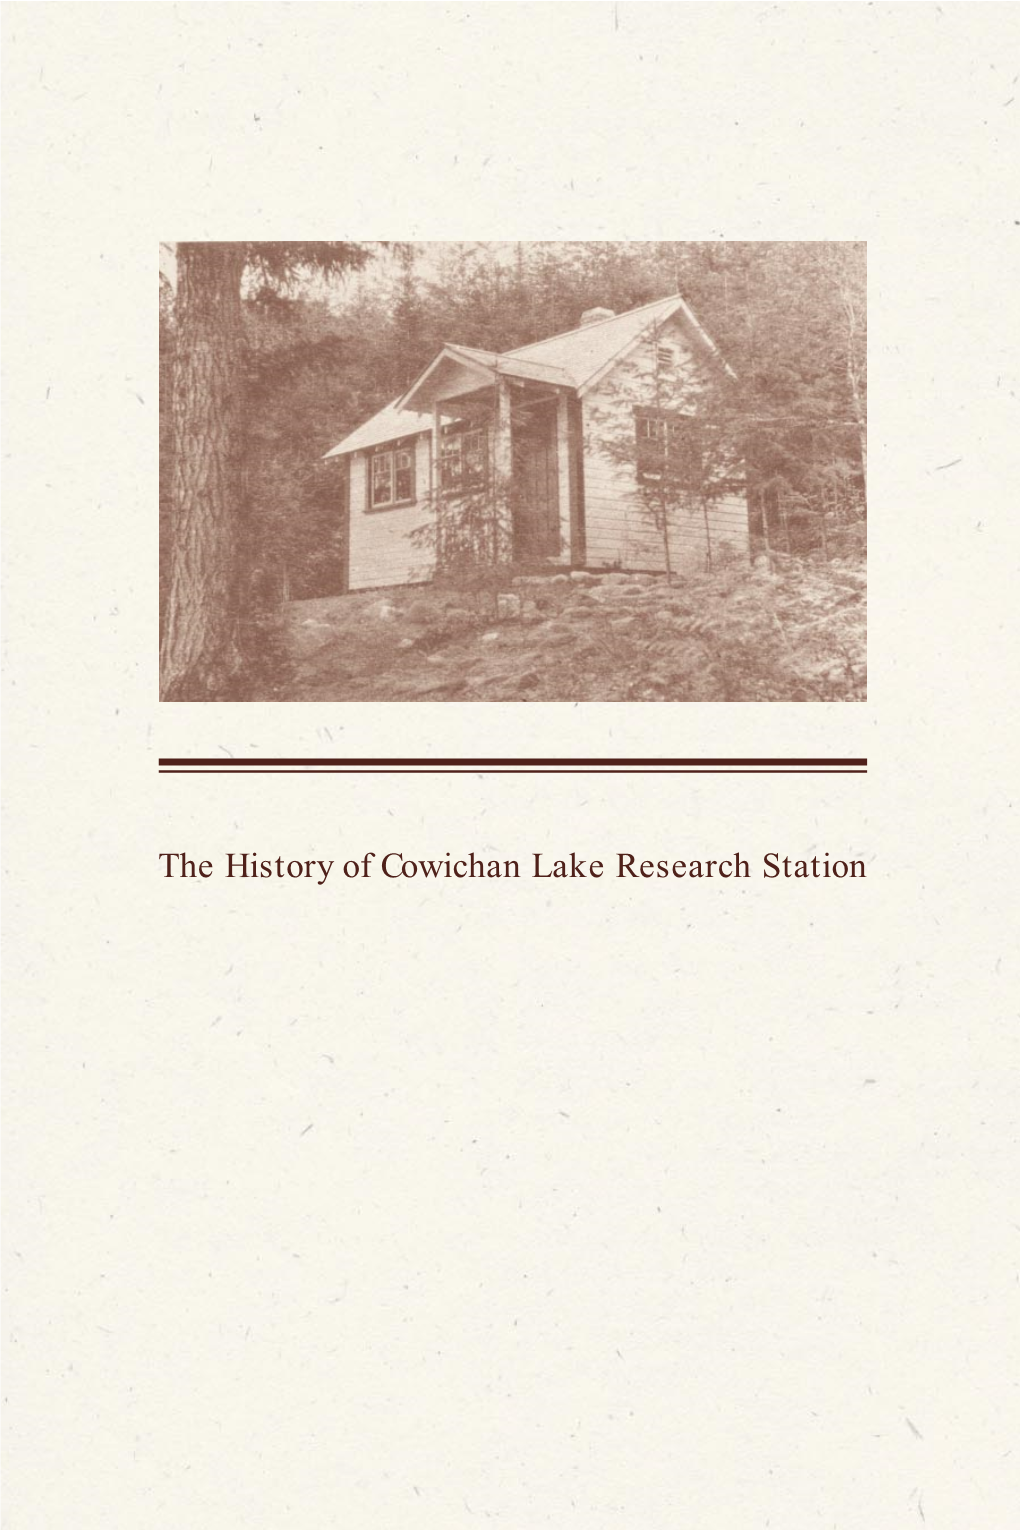 The History of Cowichan Lake Research Station